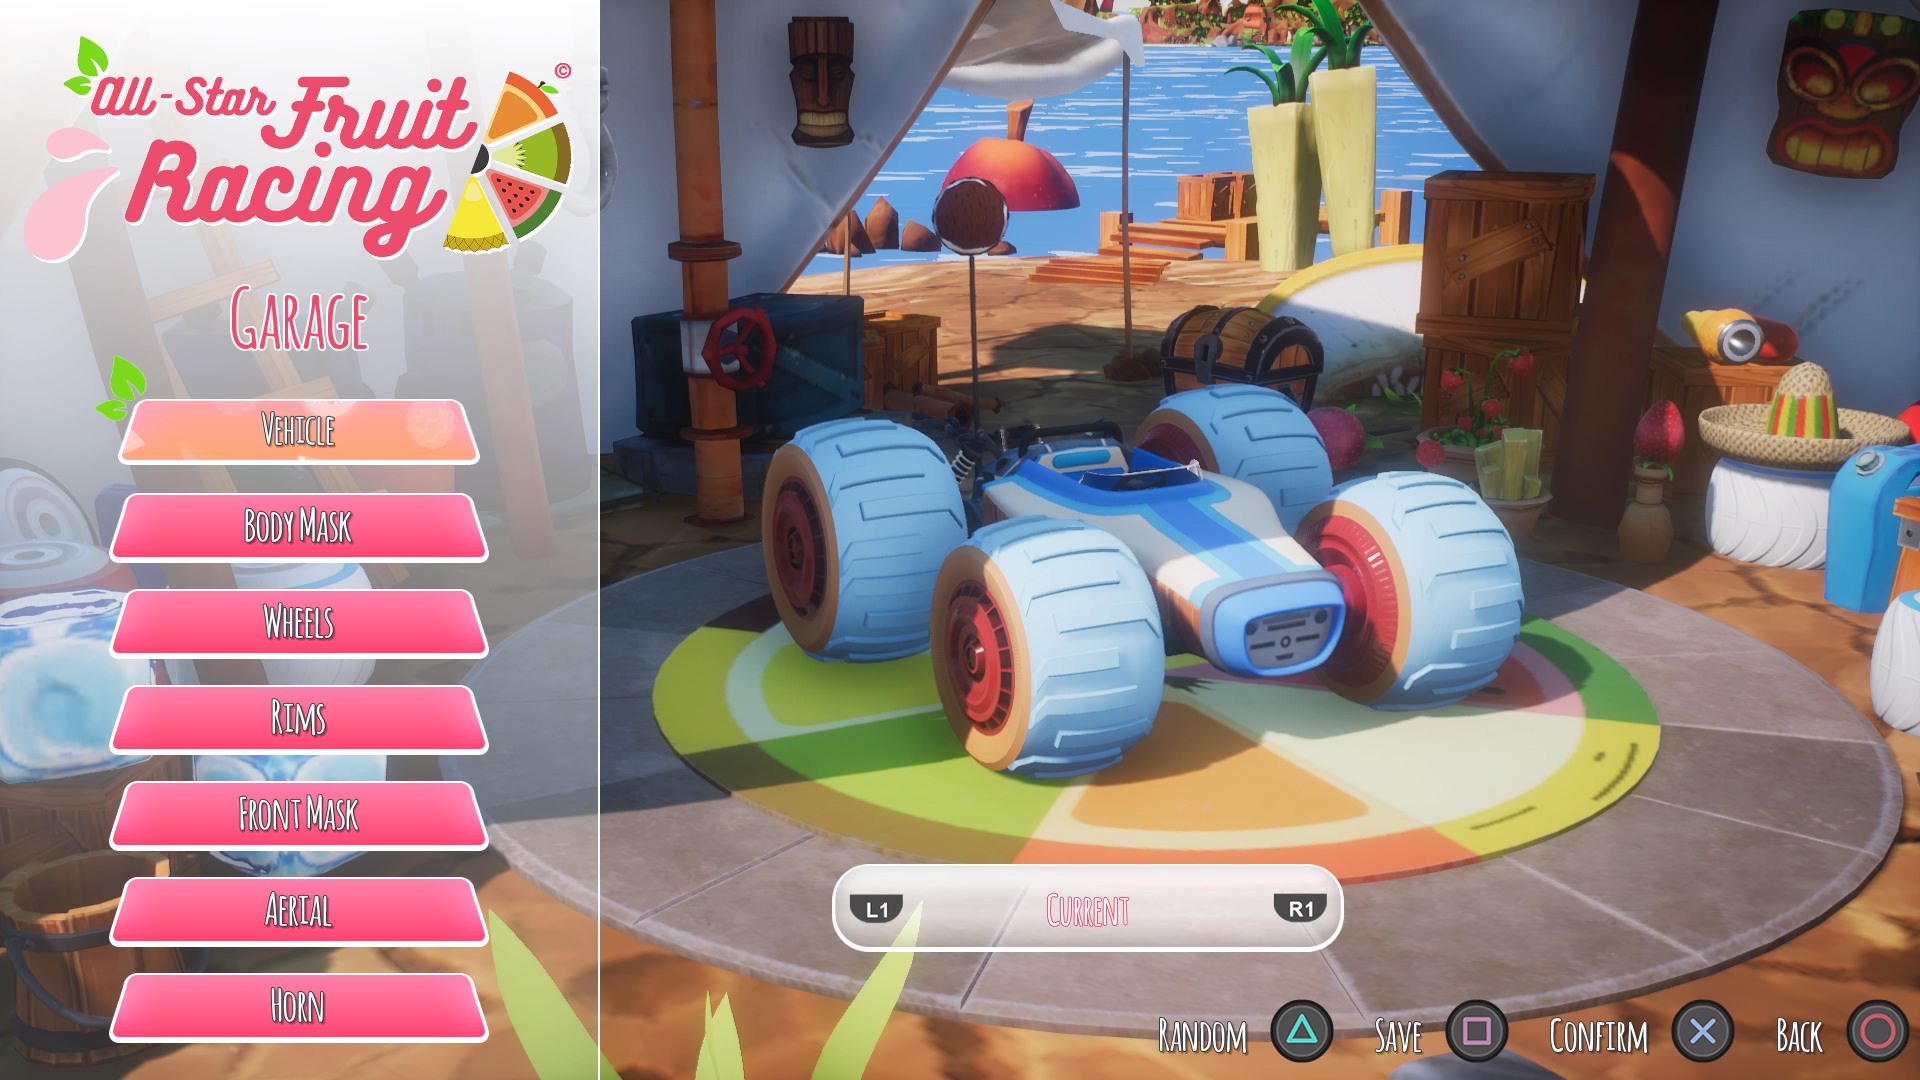 All-Star Fruit Racing Review 2